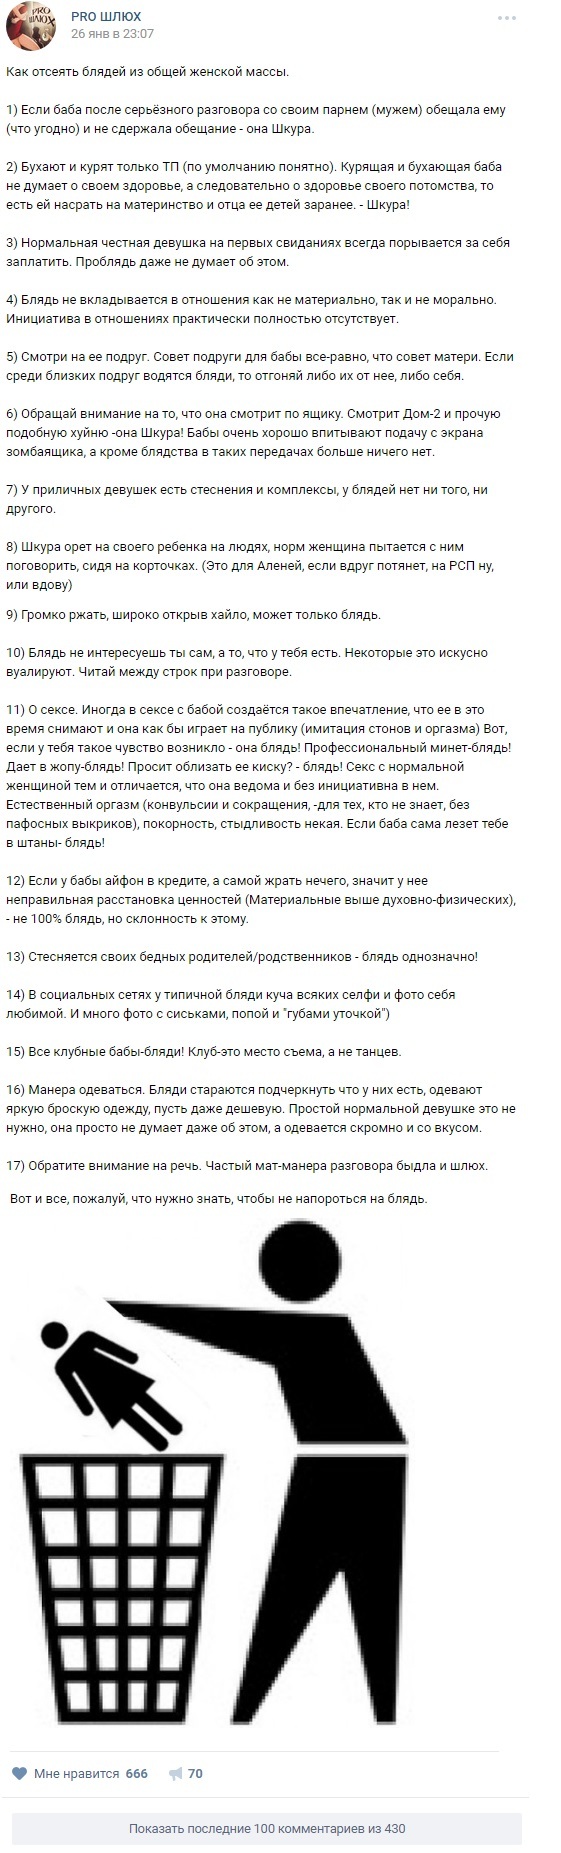 How to weed out whores from the general mass - Screenshot, In contact with, Шлюха, Skin, Humor, Longpost